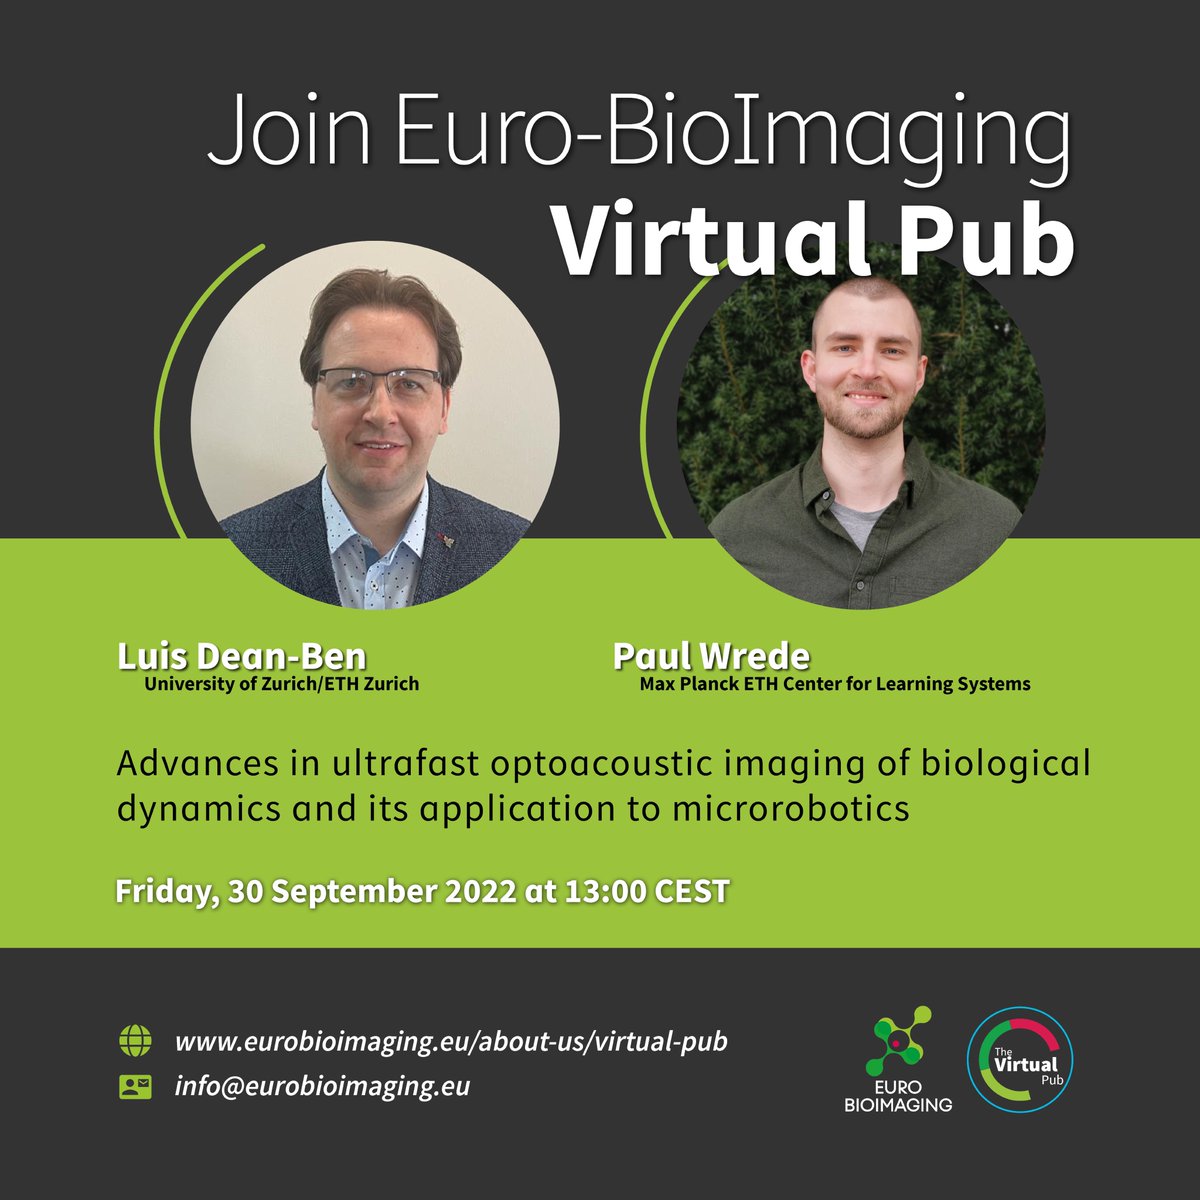 Tracking objects with optoacoustic imaging, following tumor cells and even #MicroRobots 🤖 in vivo!
Cool topic for our next #VirtualPub with @paul_wrede @ETH_en and Luis Den-Bean #MaxPlanck ETH Center for Learning Systems. All are welcome!⤵️
@MPI_IS
eurobioimaging.eu/about-us/virtu…